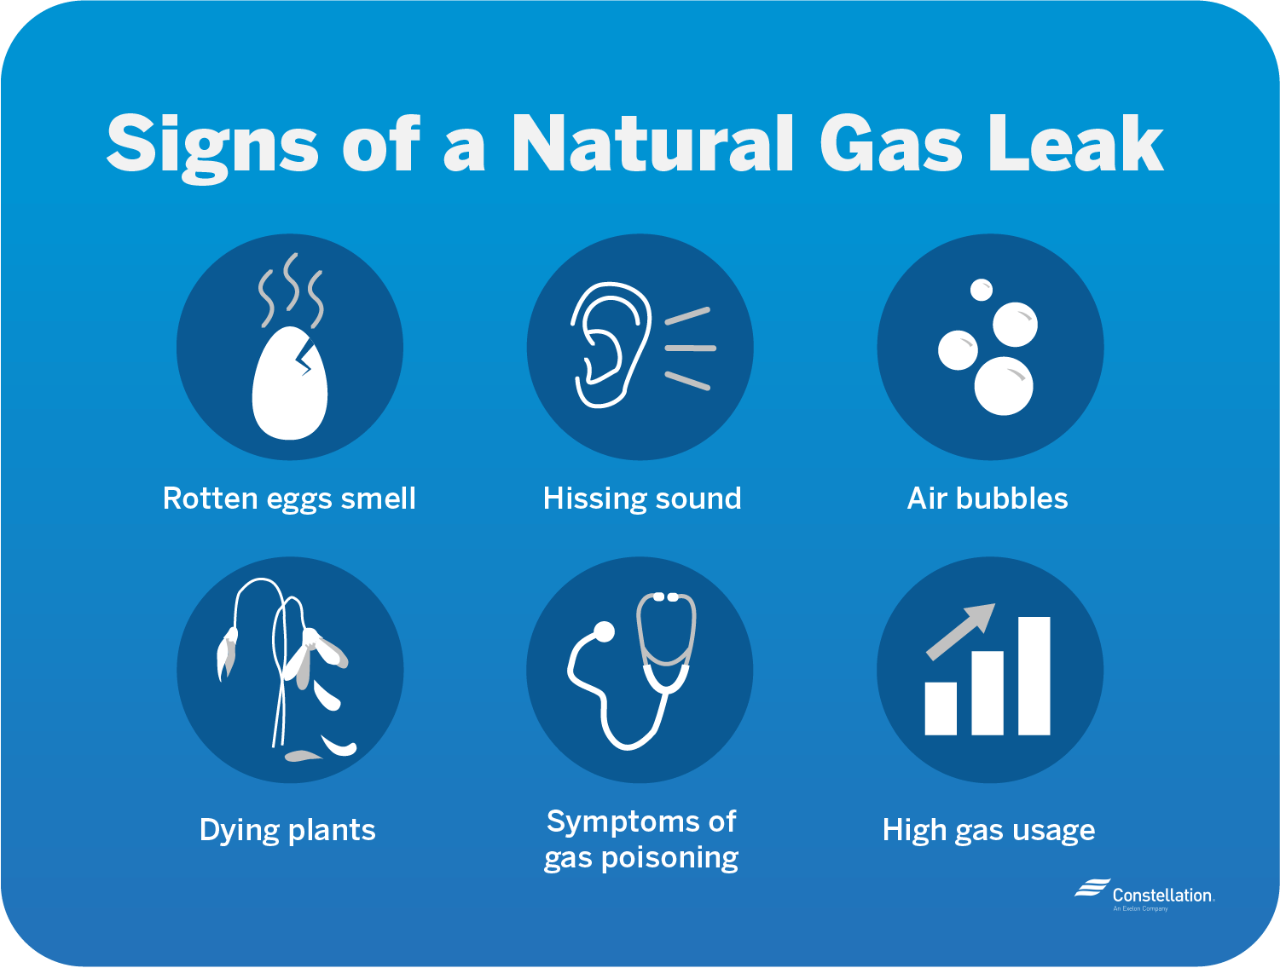 Rotten eggs smell, hissing sounds, air bubbles in standing water outdoors, dying plants, symptoms of gas poisoning, and high gas usage all can indicate a natural gas leak.